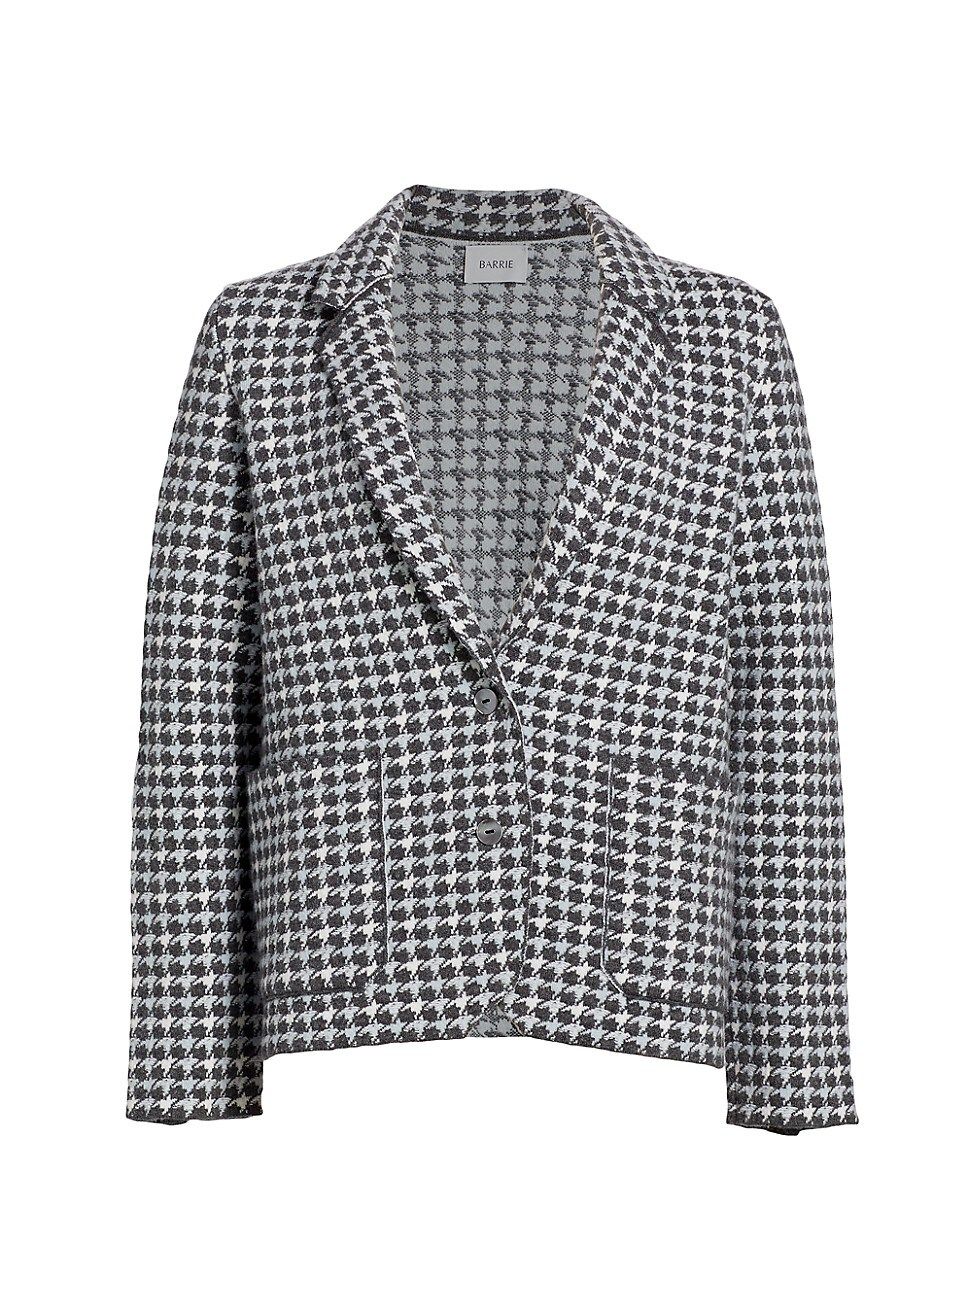 Women's Emily In Paris Knit Houndstooth Jacket - Antique White Peat - Size Small | Saks Fifth Avenue